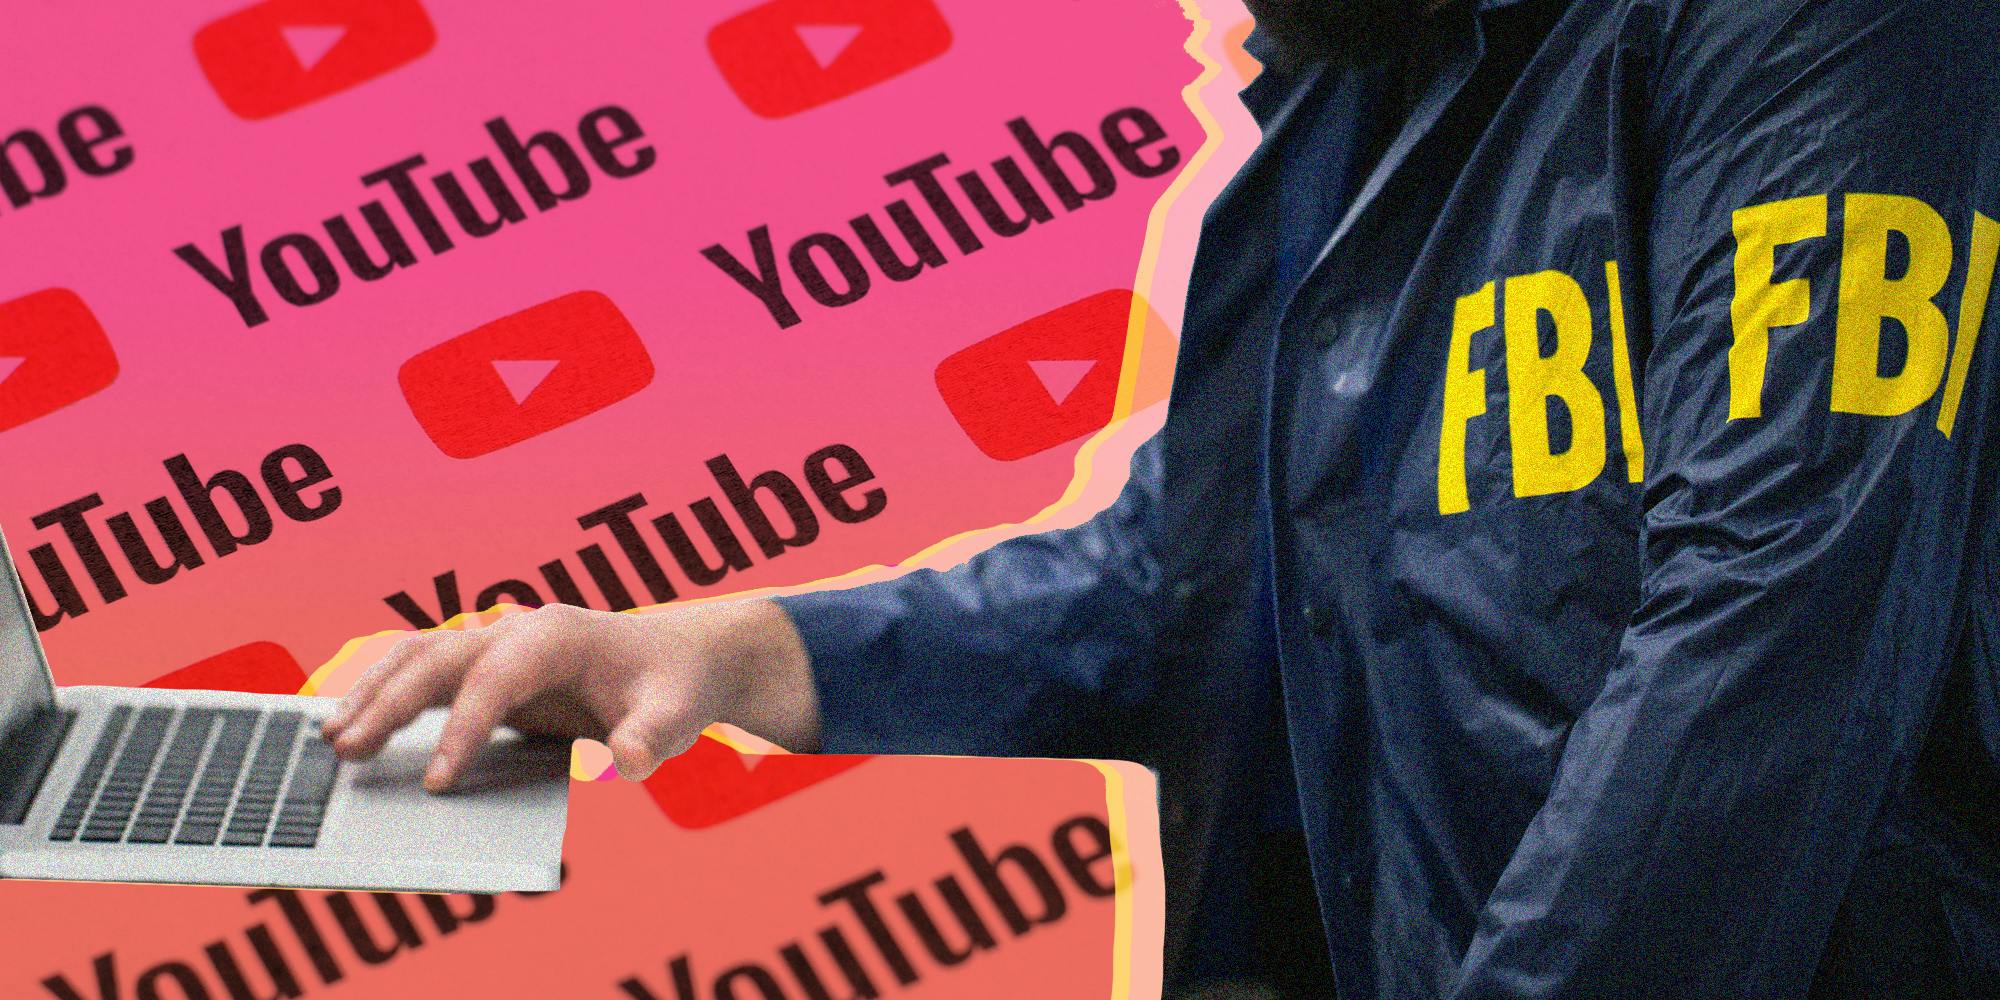 Investigators Order YouTube to Share the Identities of Video-Watchers